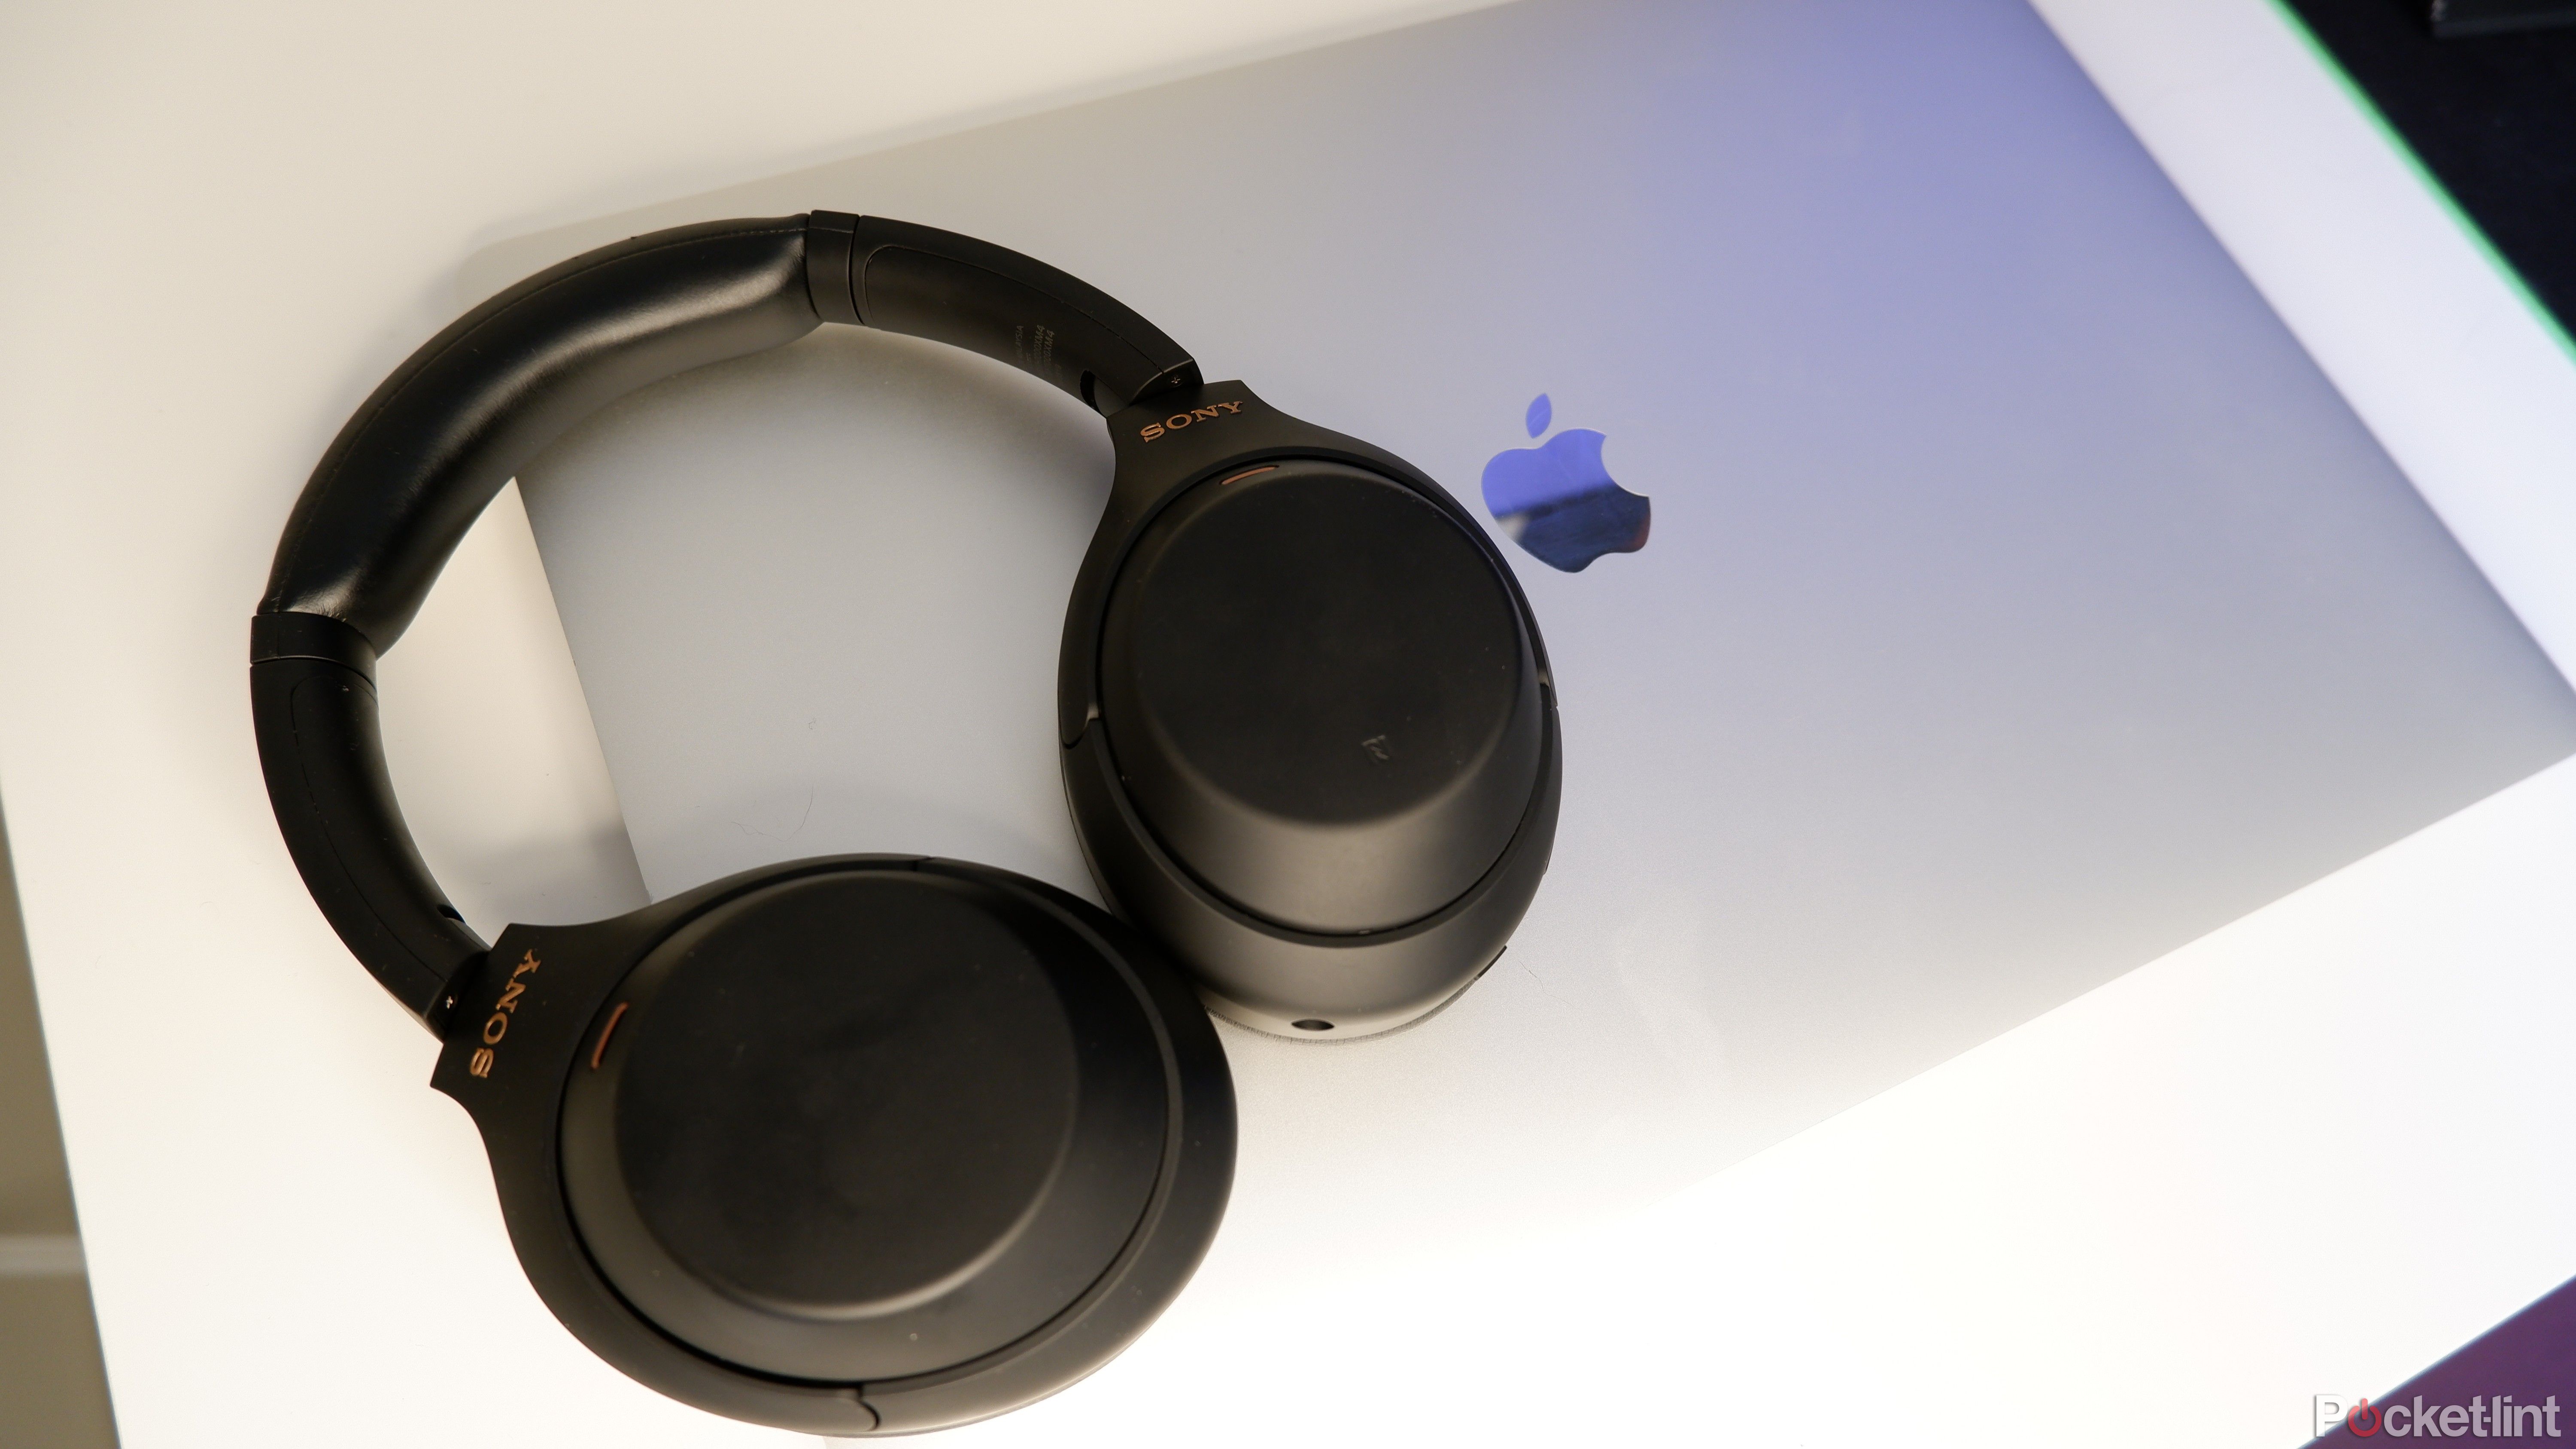 A pair of Sony WH-1000XM4s connected to a closed Macbook Pro.